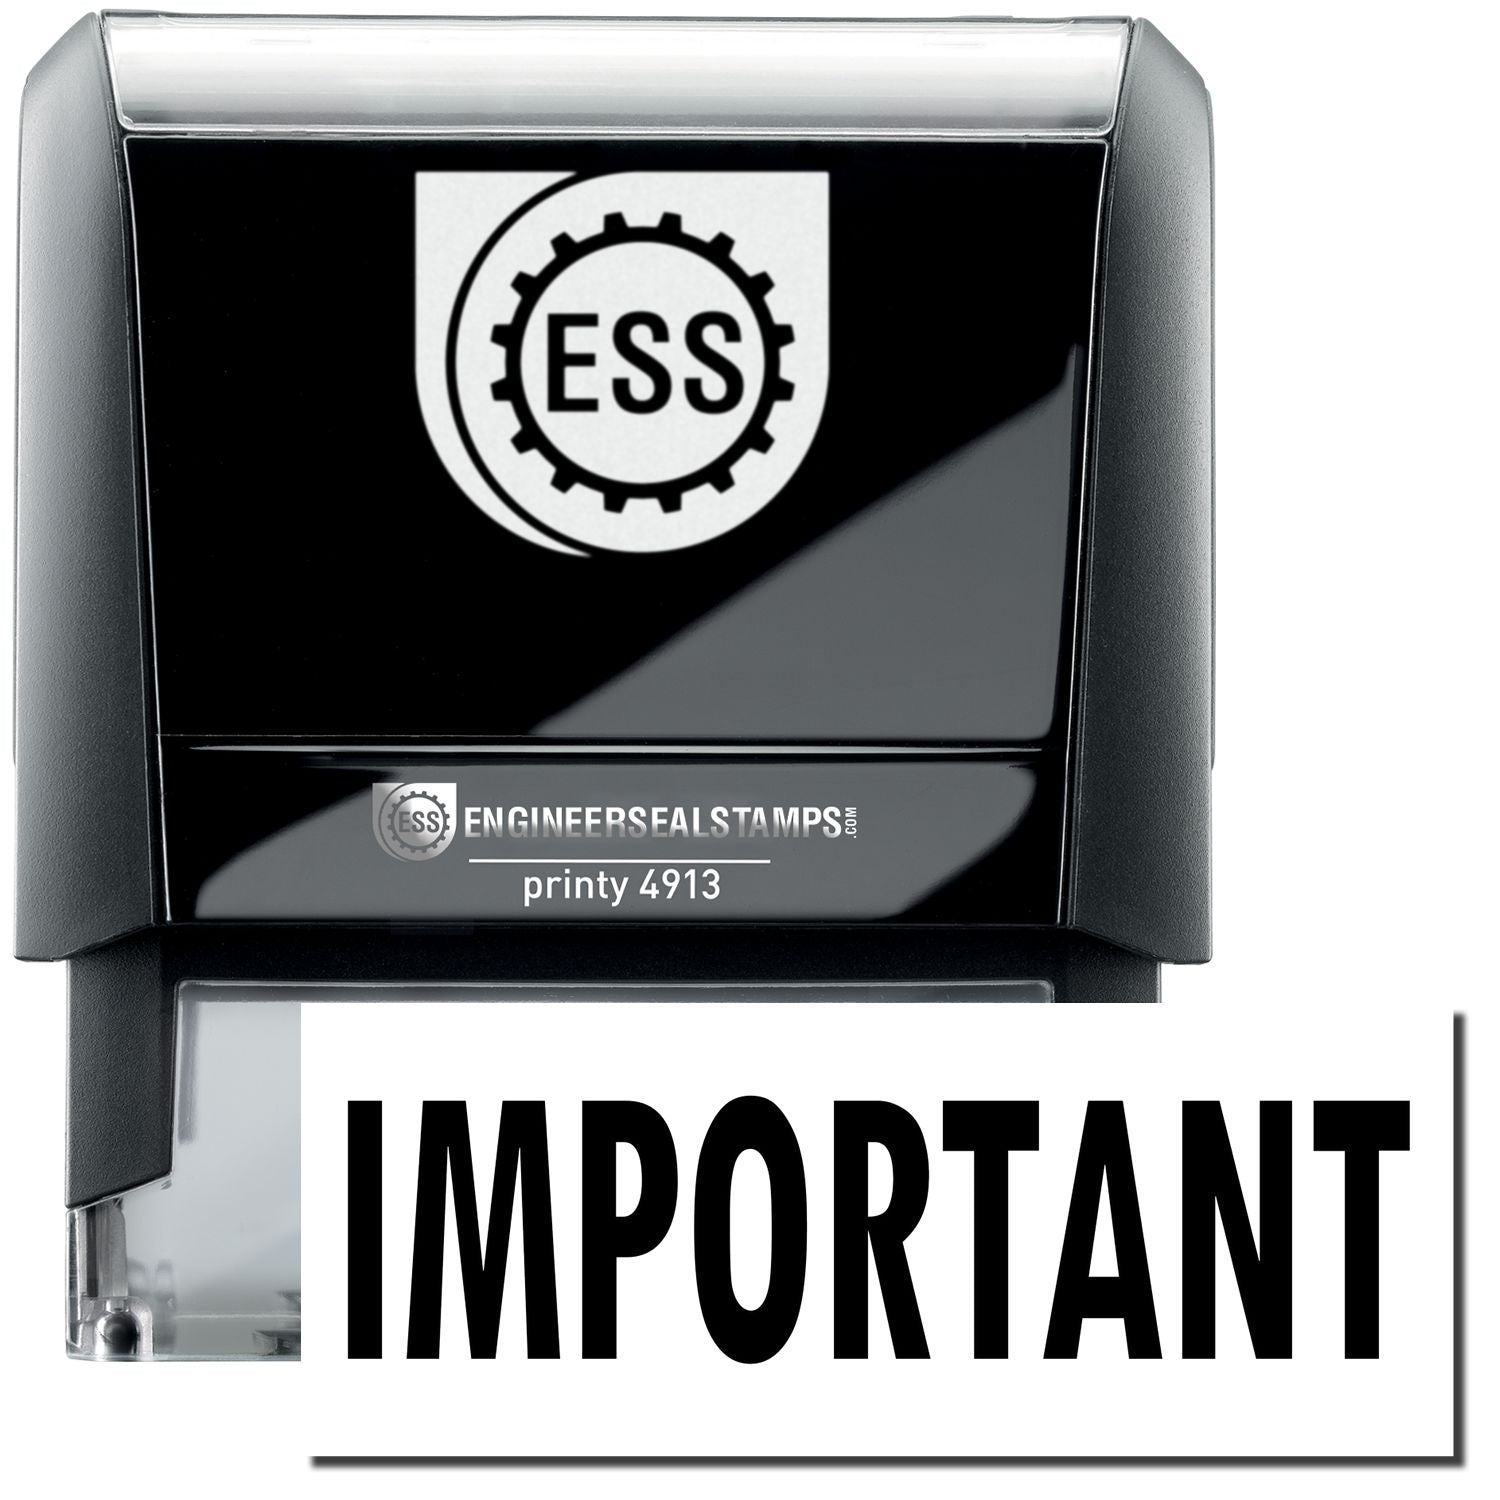 A self-inking stamp with a stamped image showing how the text "IMPORTANT" in a large bold font is displayed by it.